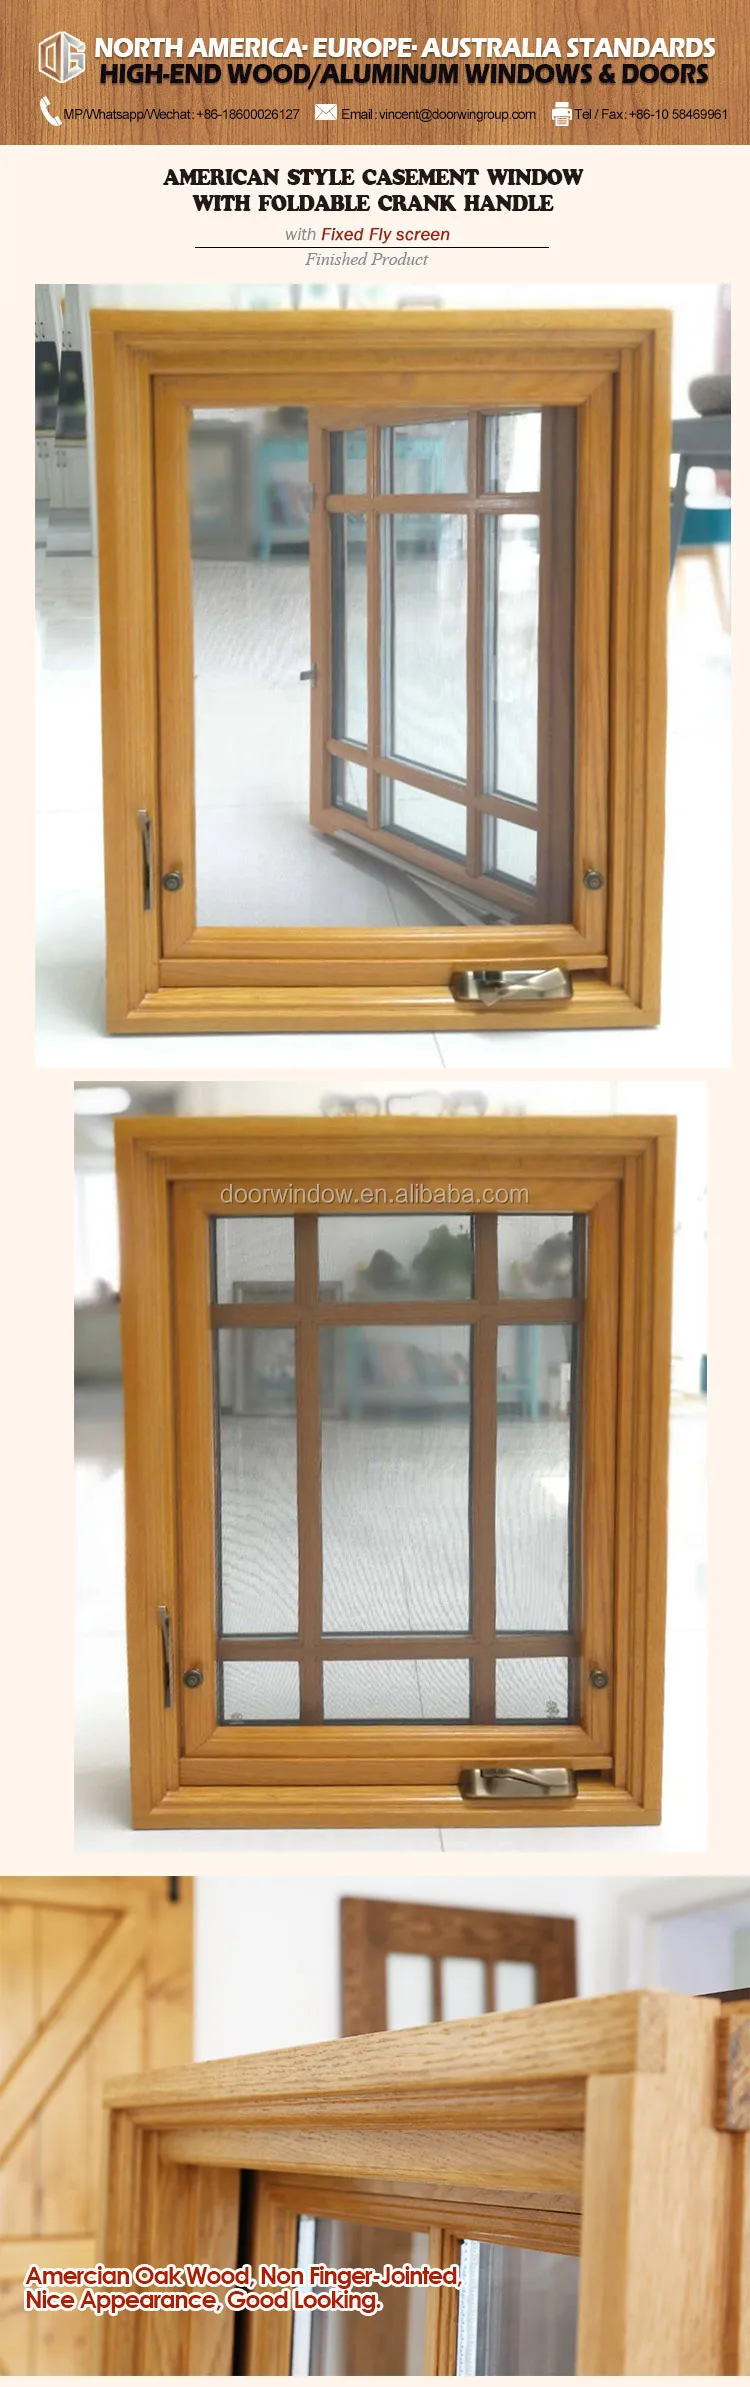 American AAMA NFRC Certificate Fold-able Crank Handle push out casement windows reviews Insulated Double Glazed crank window